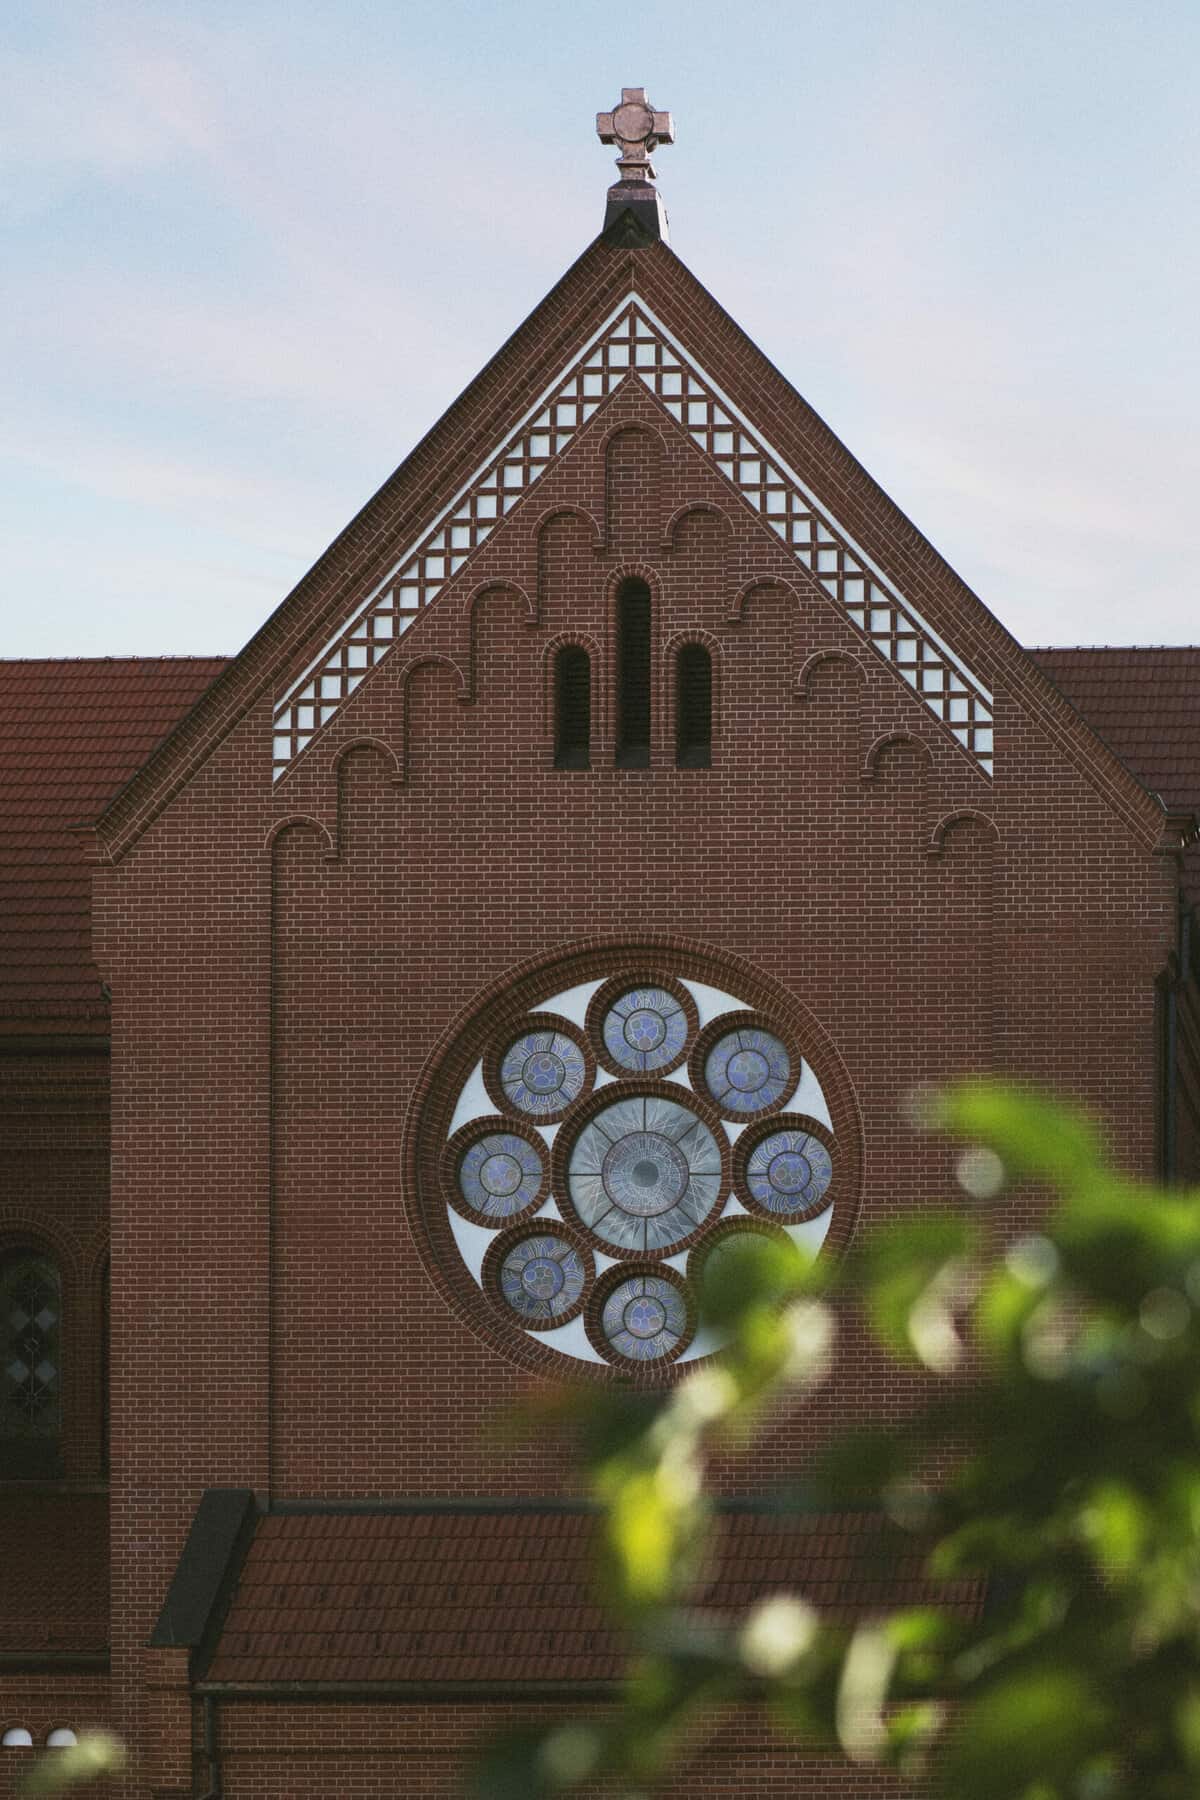 A portion of the front of a dark red brick church is shown with a stained glass rose window on the face and cross on top of the roof peak.